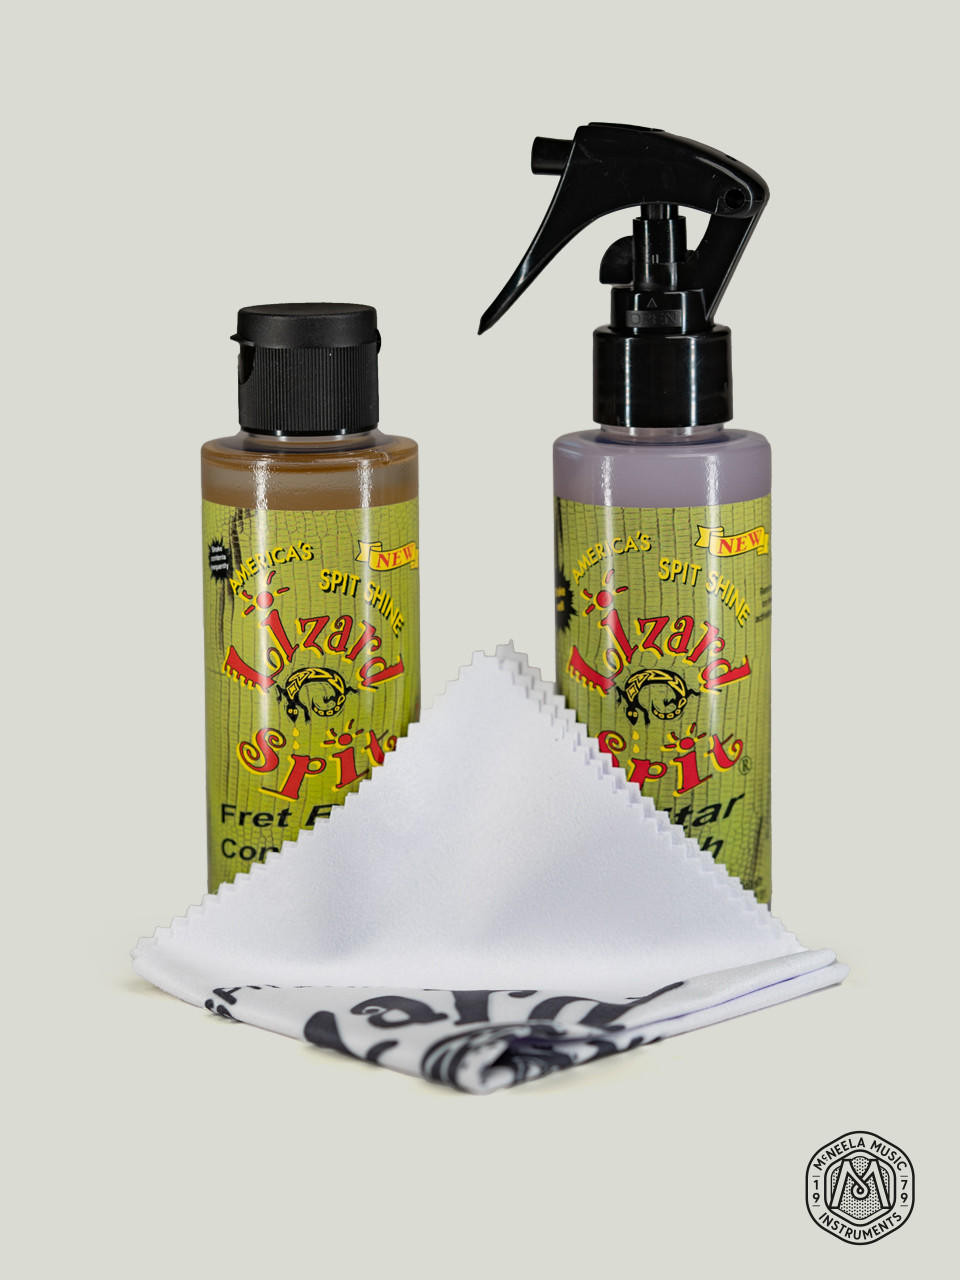 Lizard Spit Travel Size Kit ⋆ Savannah Guitar Lutherie and Mercantile